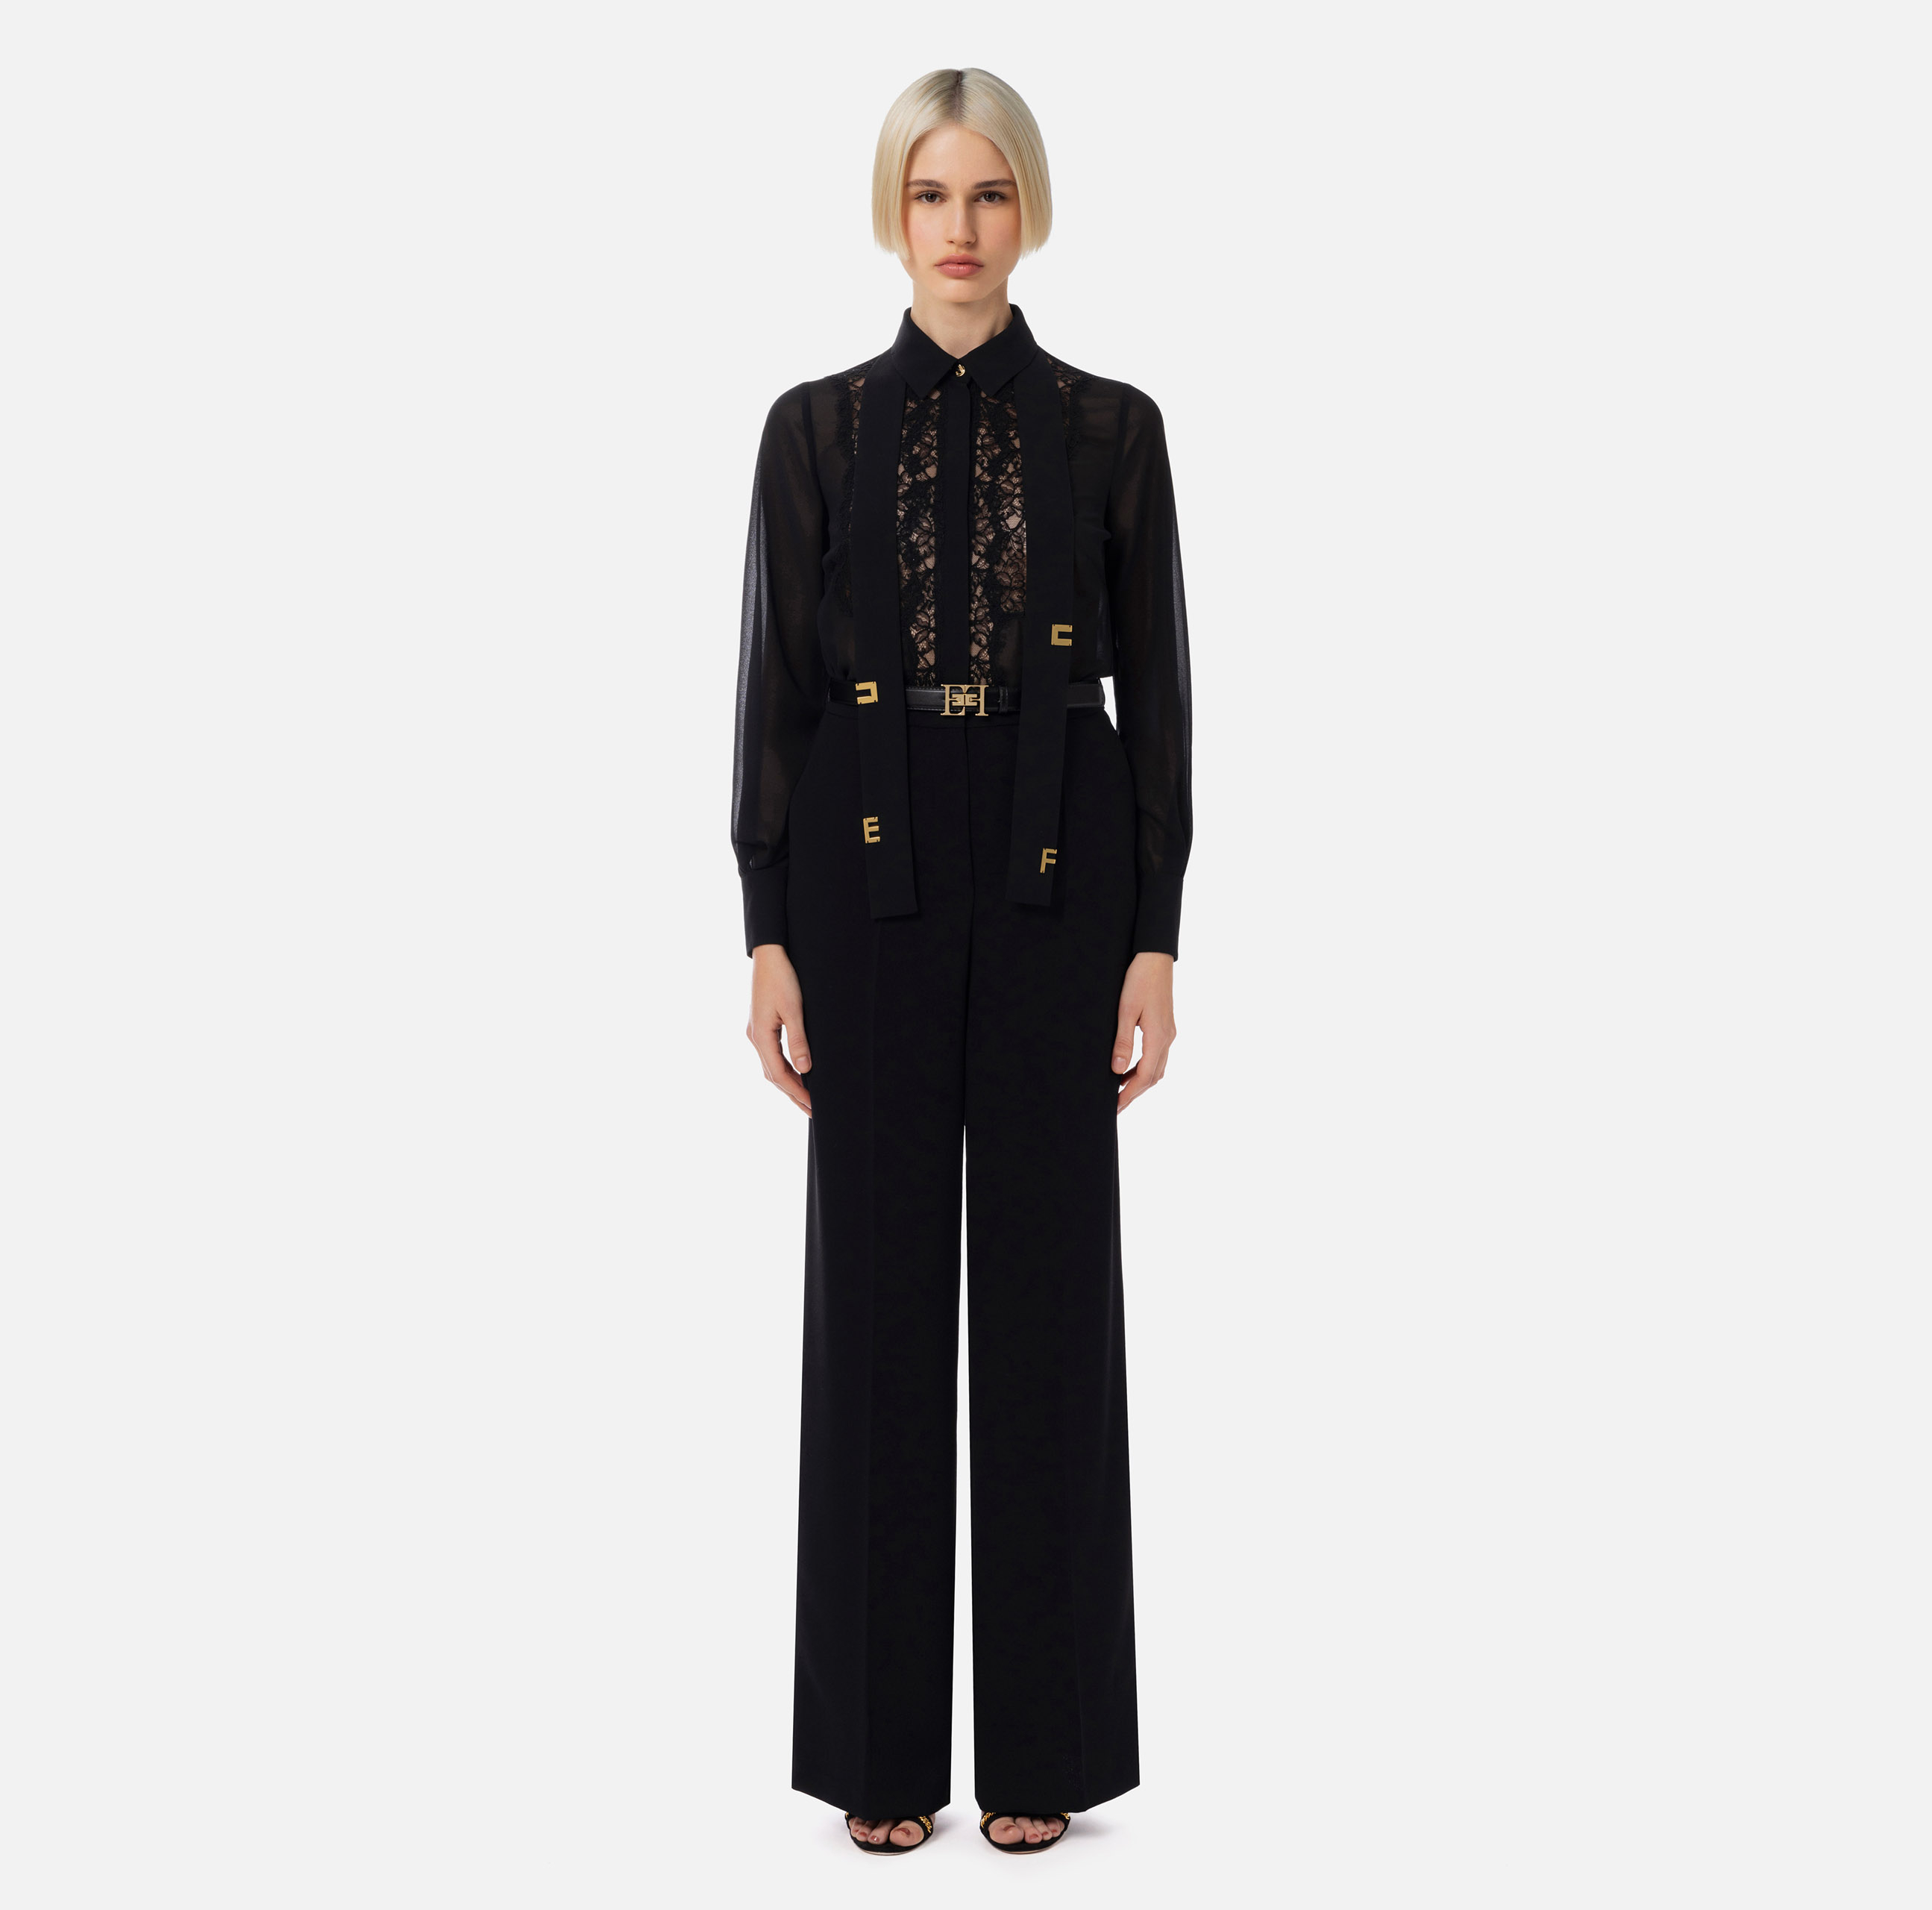 Palazzo trousers in crêpe fabric with belt | Elisabetta Franchi